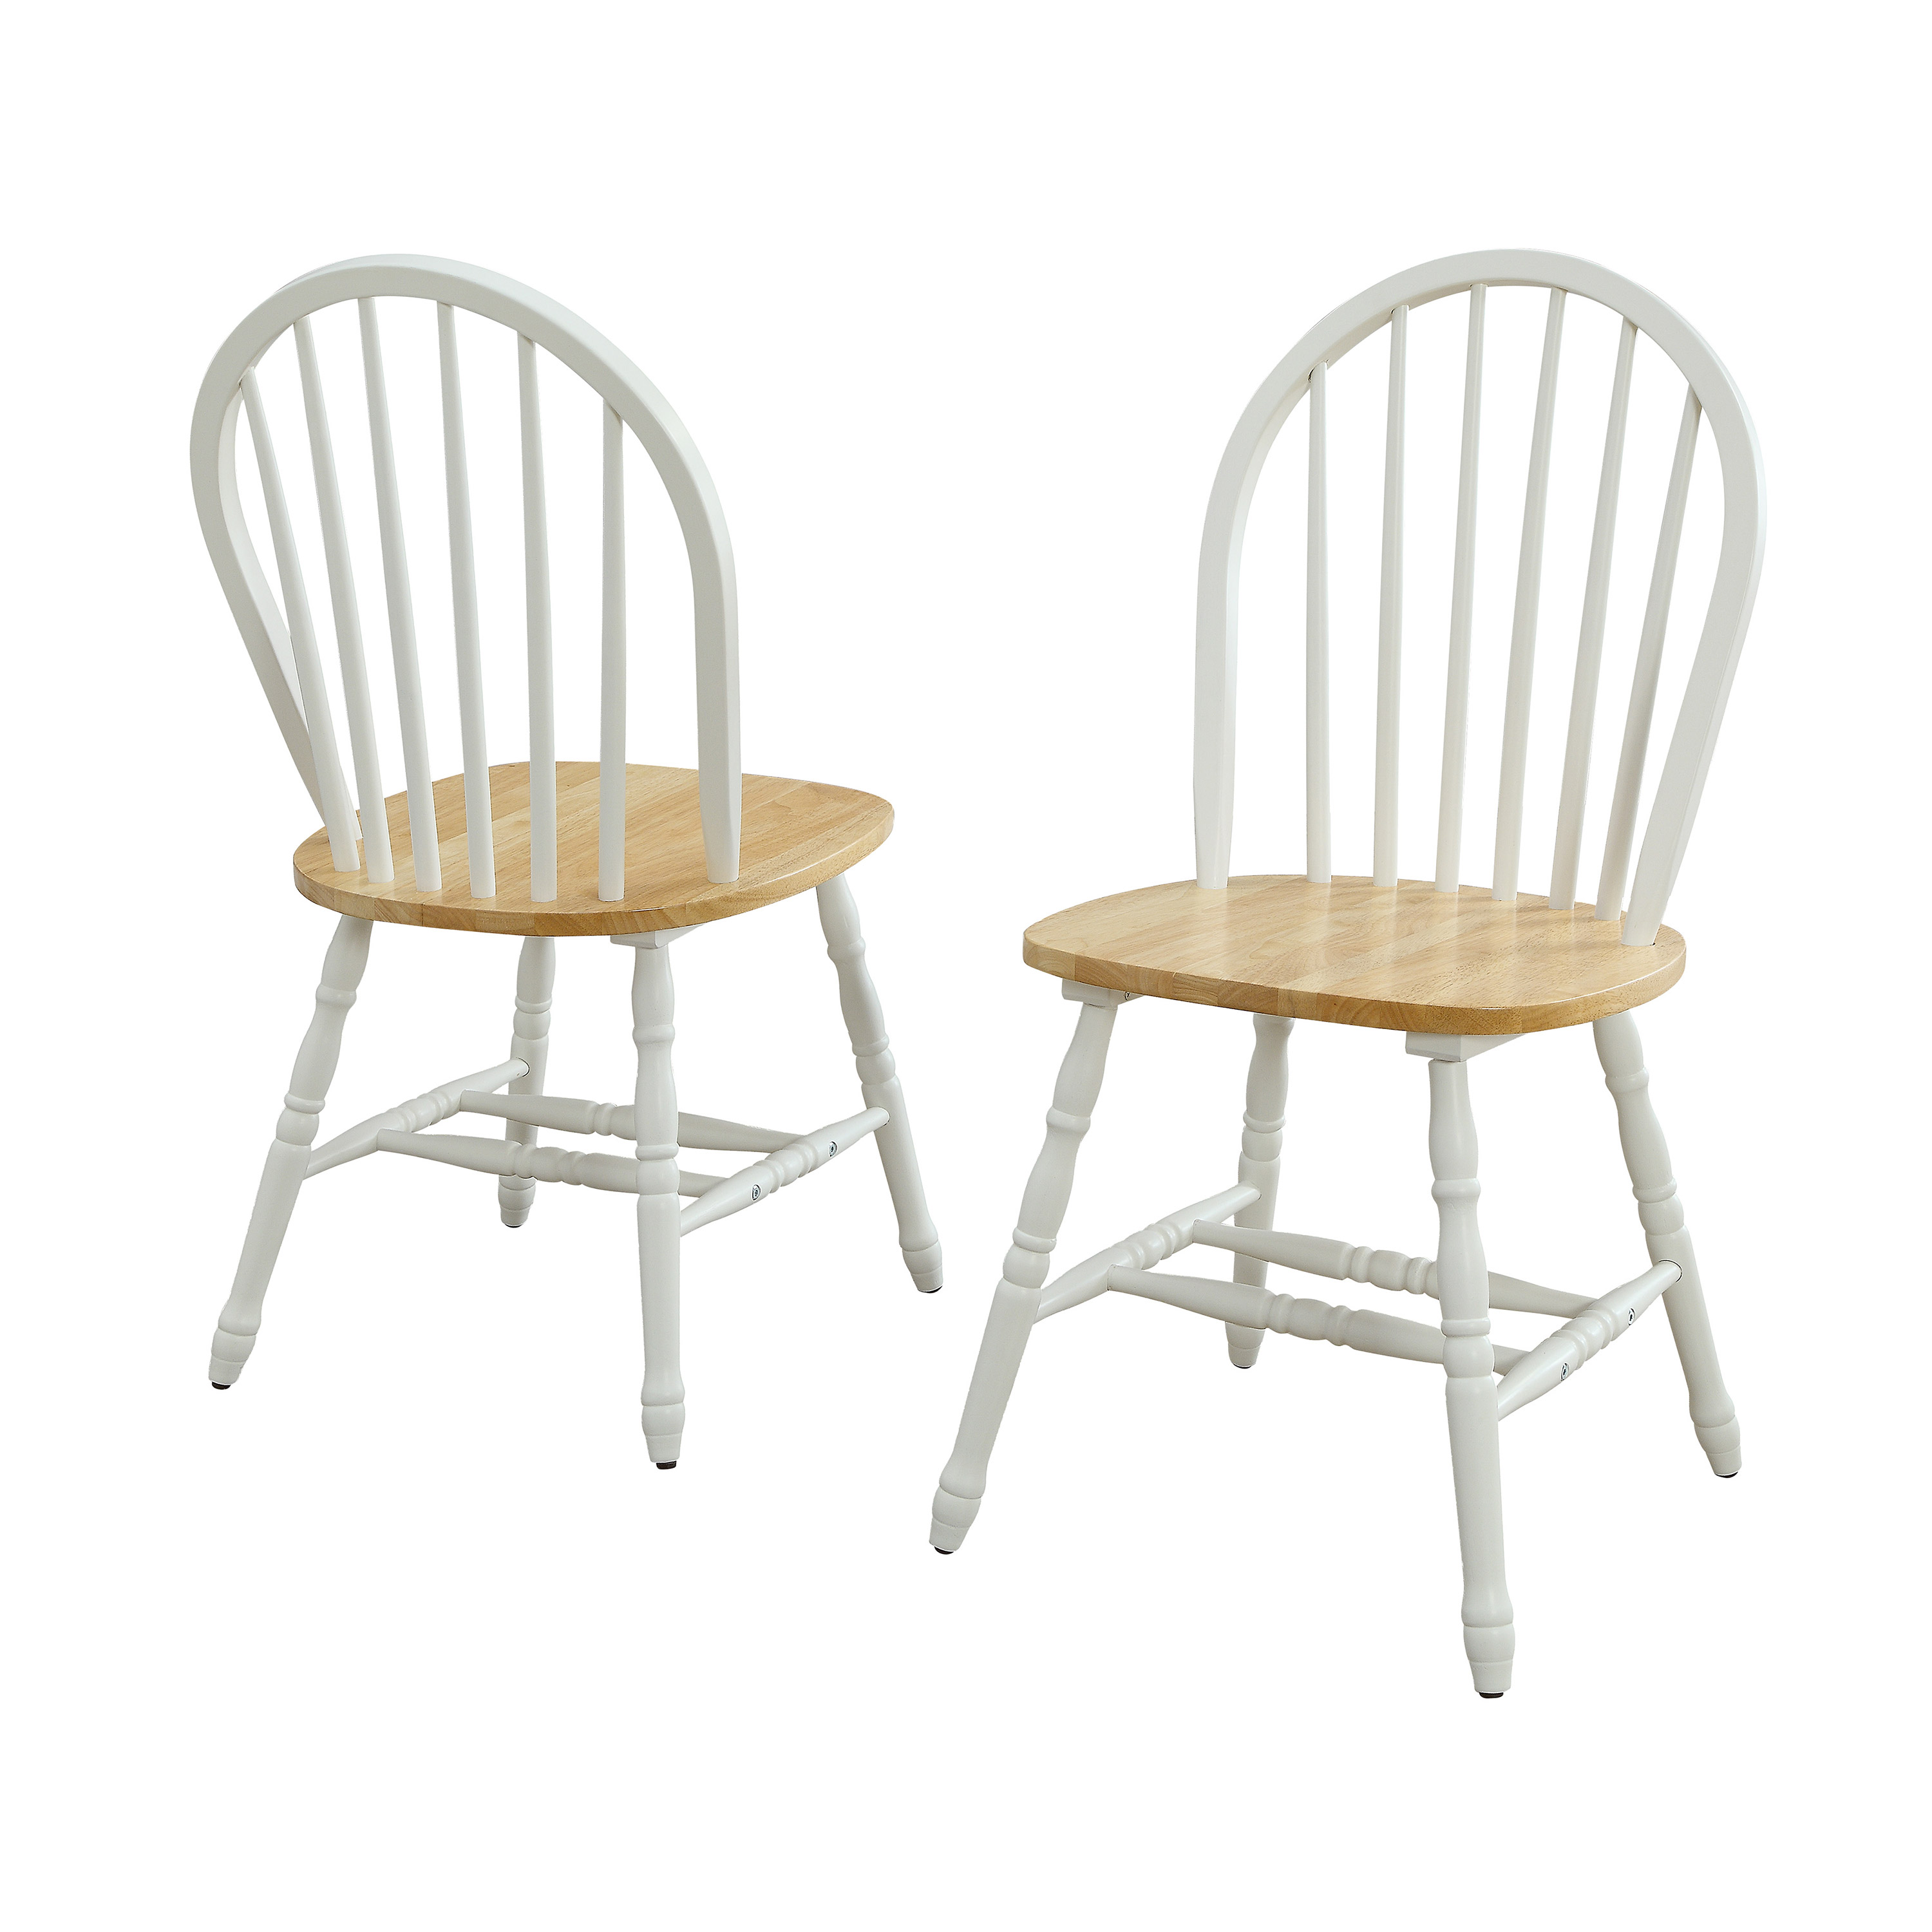 Better Homes and Gardens Autumn Lane Windsor Solid Wood Dining Chairs, White and Oak (Set of 2) - image 2 of 8